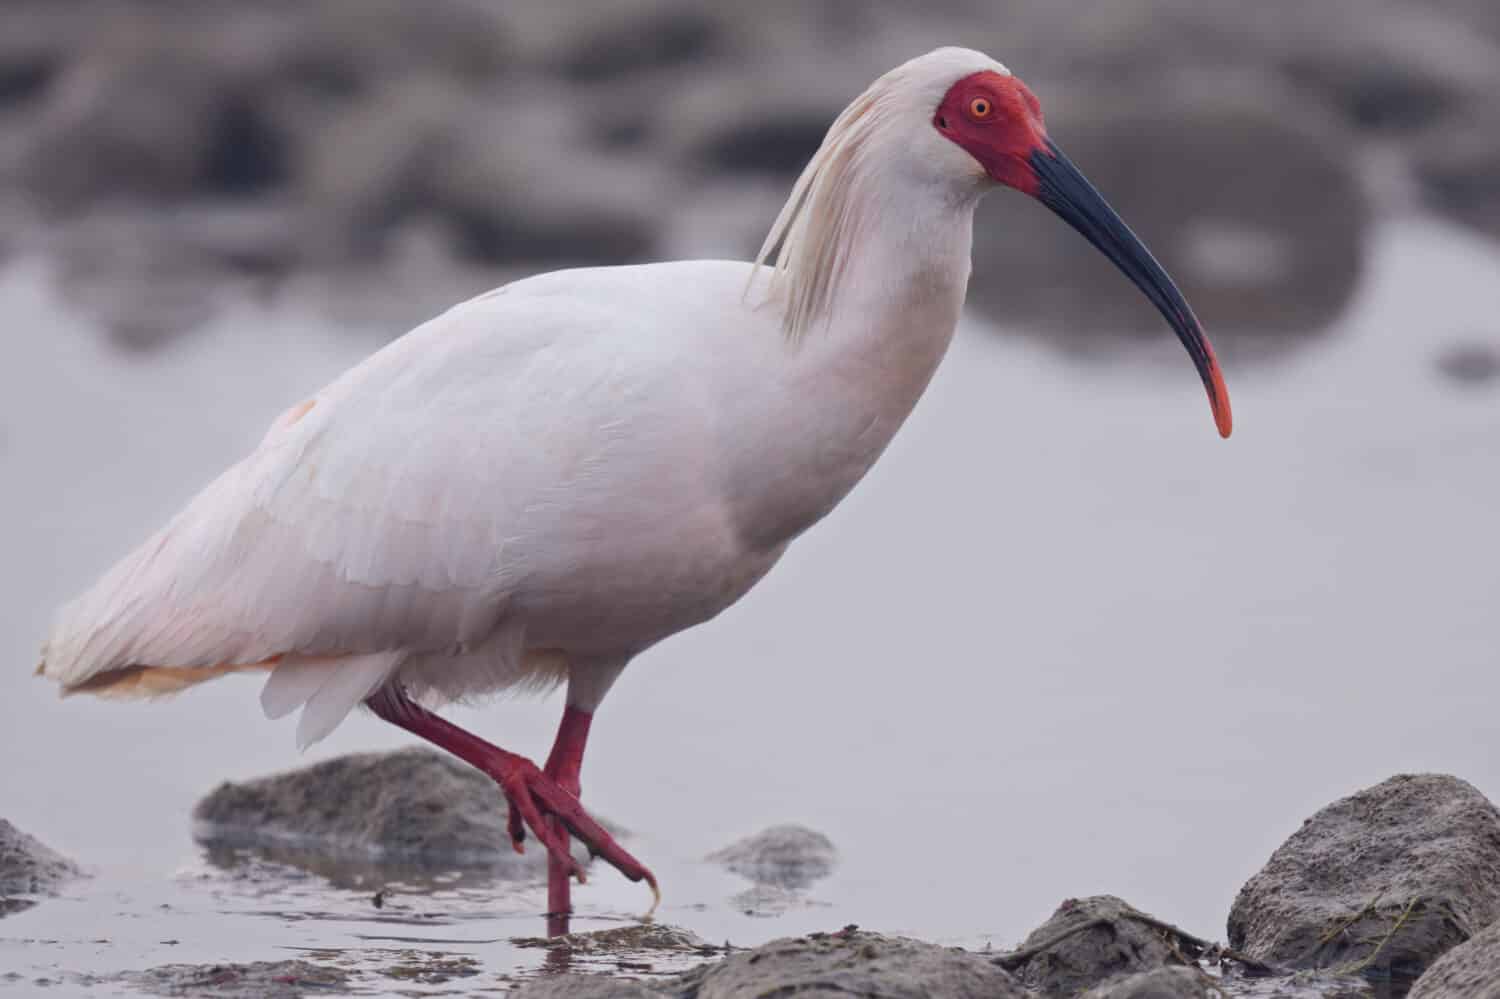 Endangered Crested Ibis (Nipponia nippon) at the Han River, Yangxian, Shaanxi Province, China.